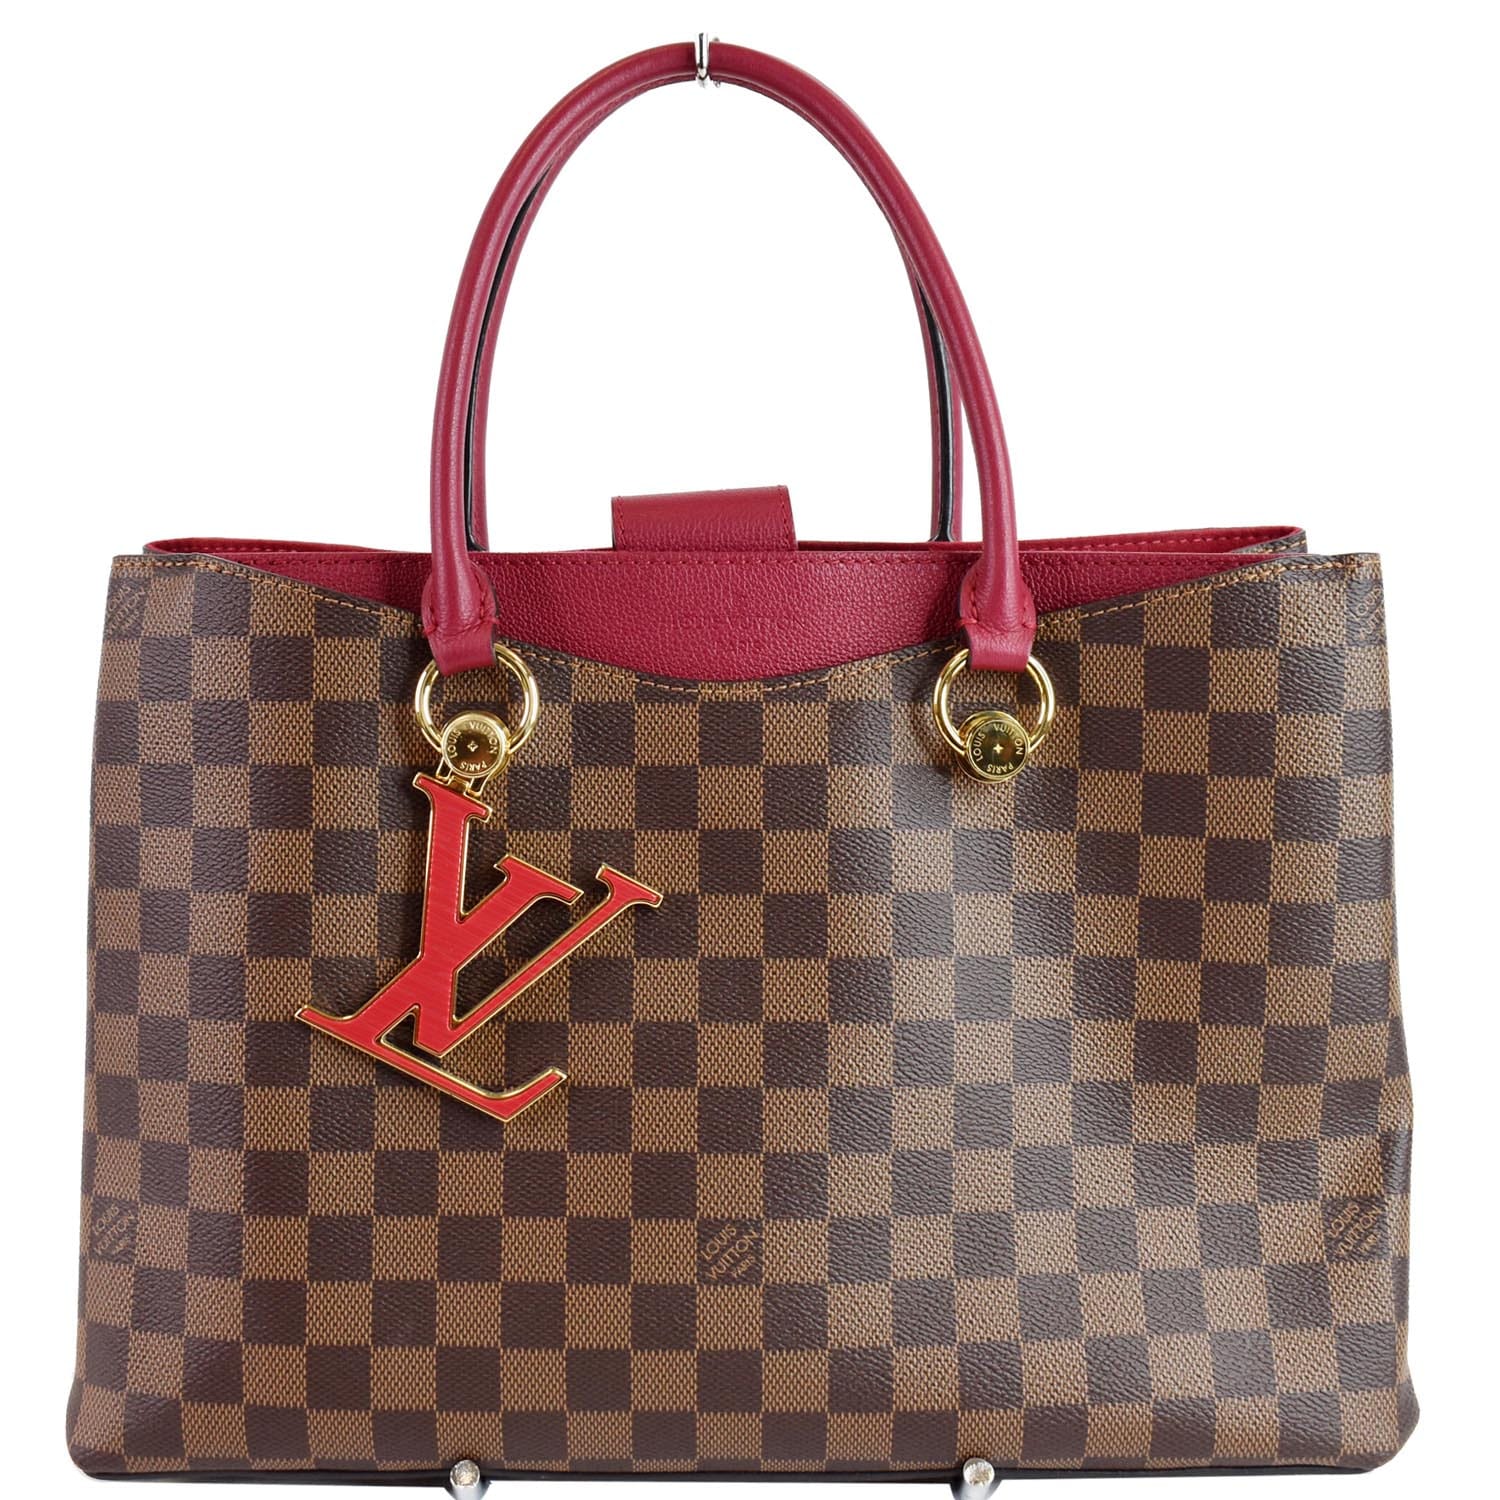 lv bags red